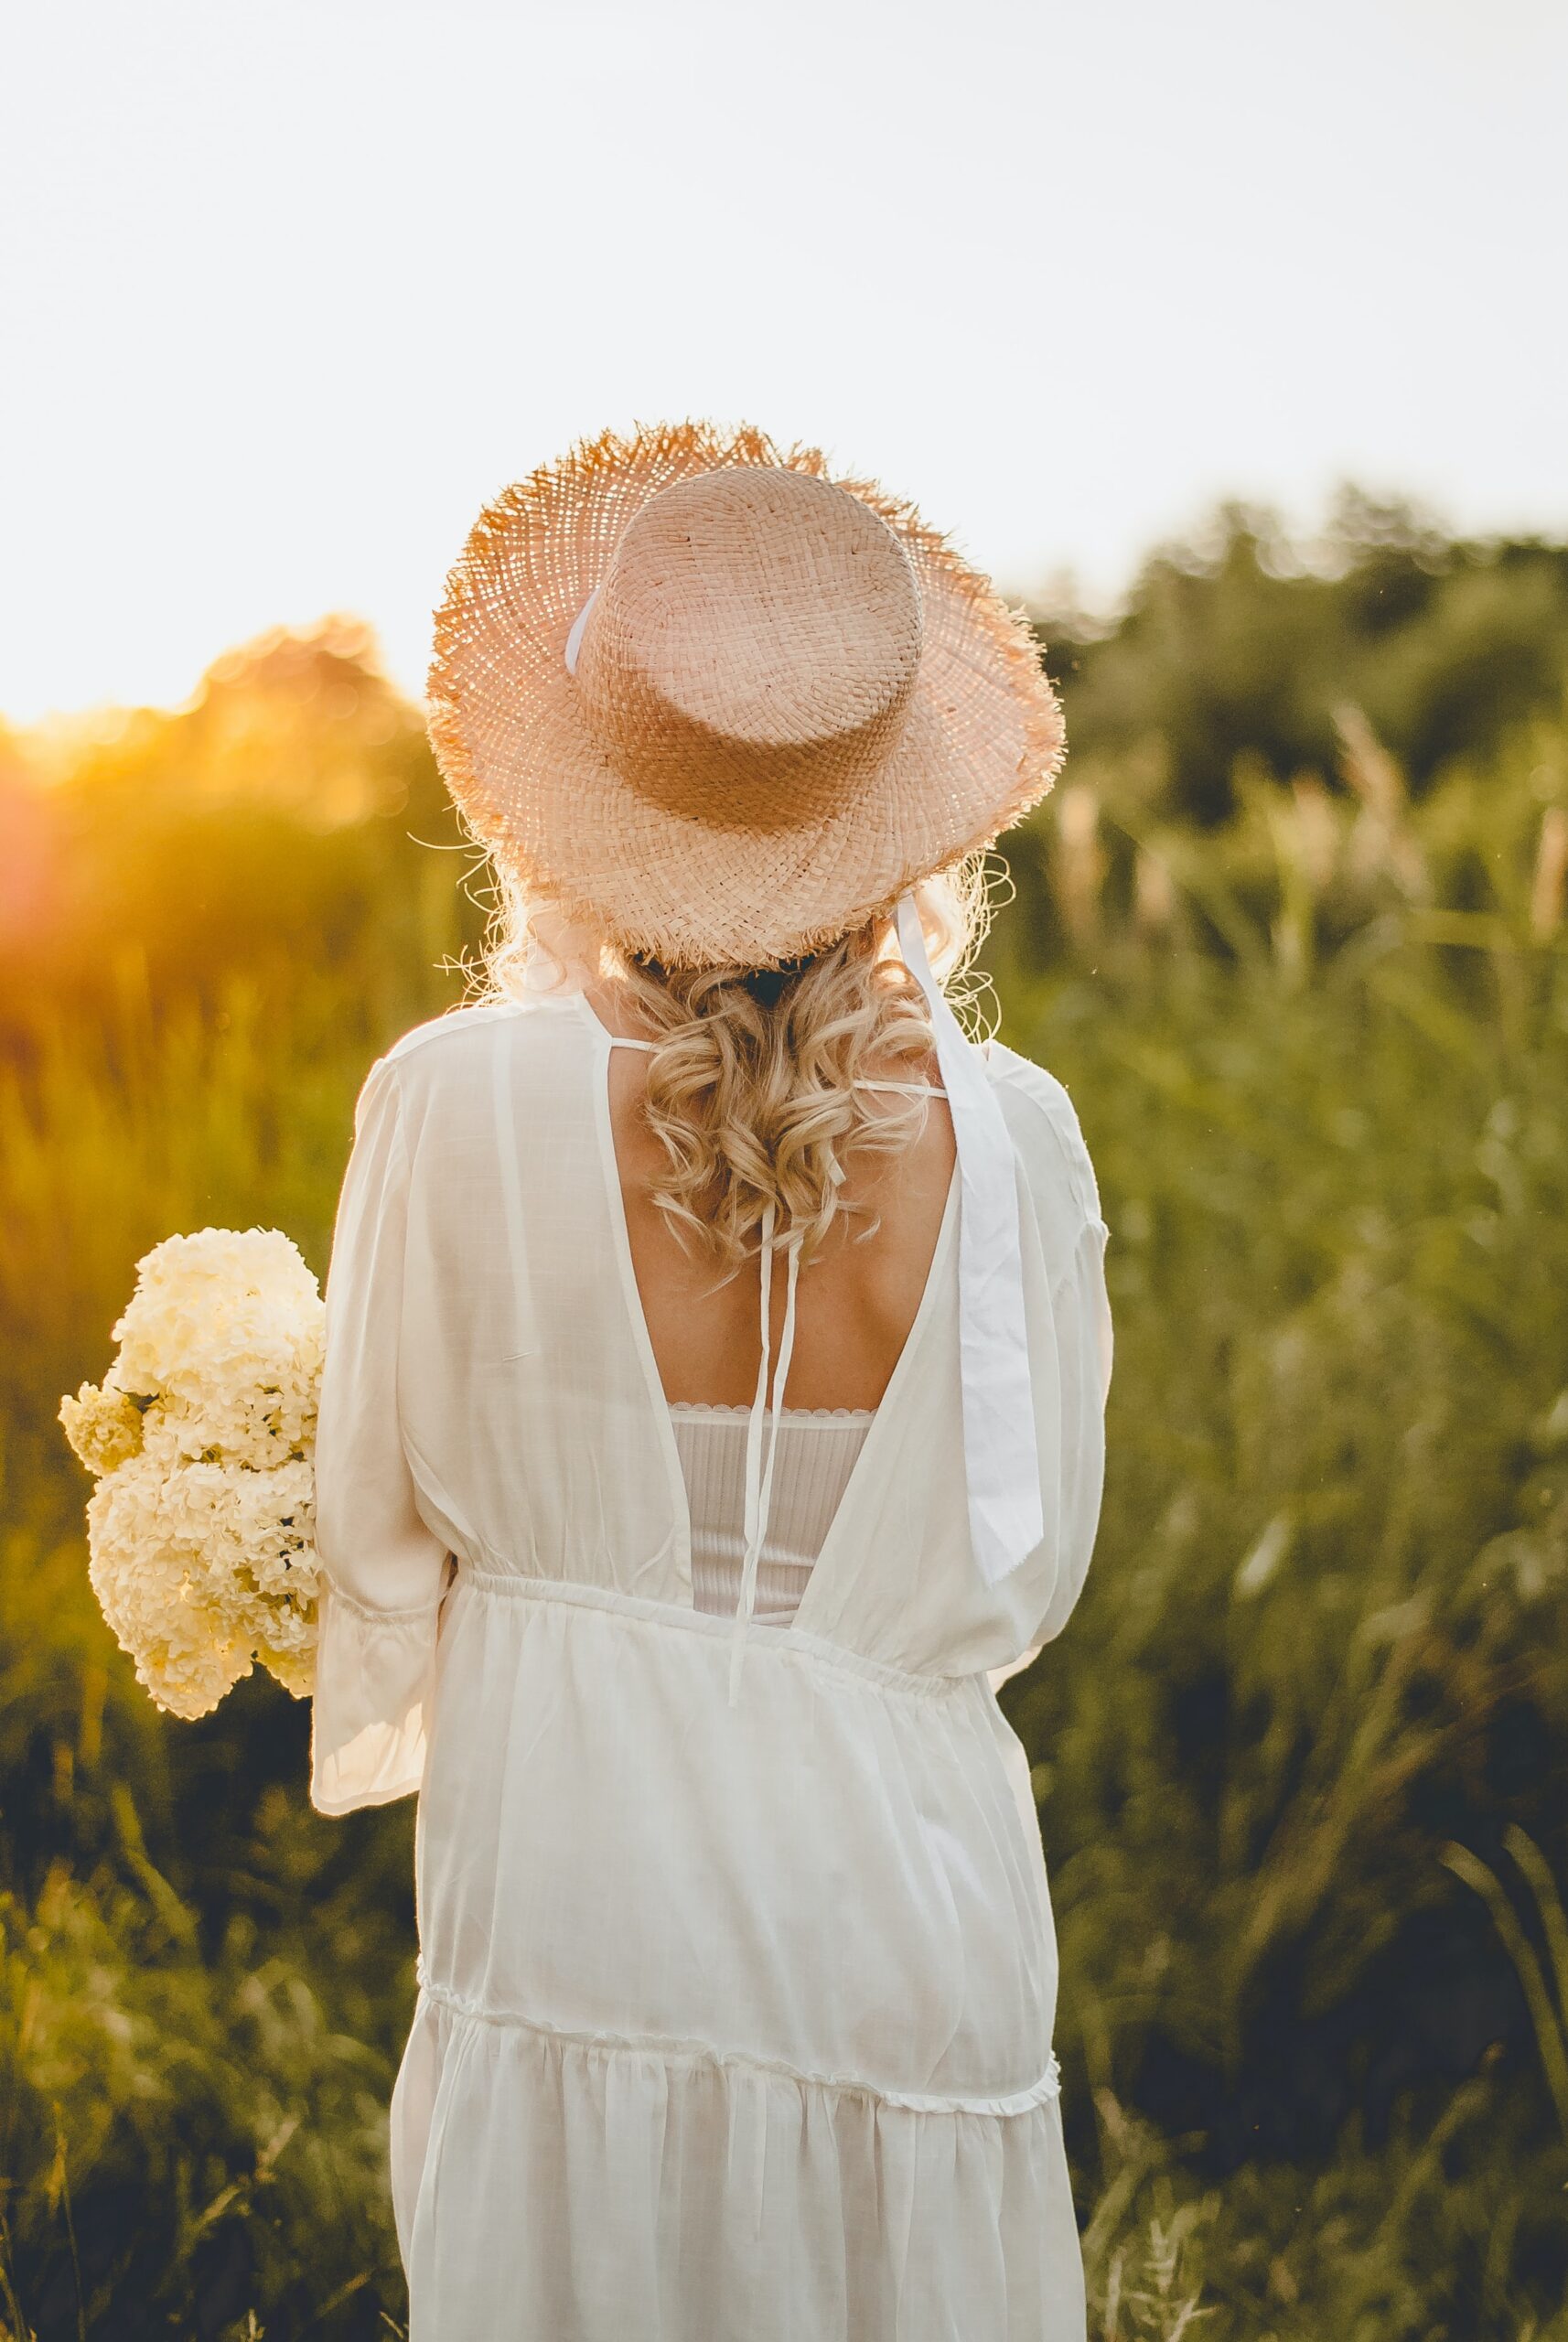 Girl in a white dress and straw hat